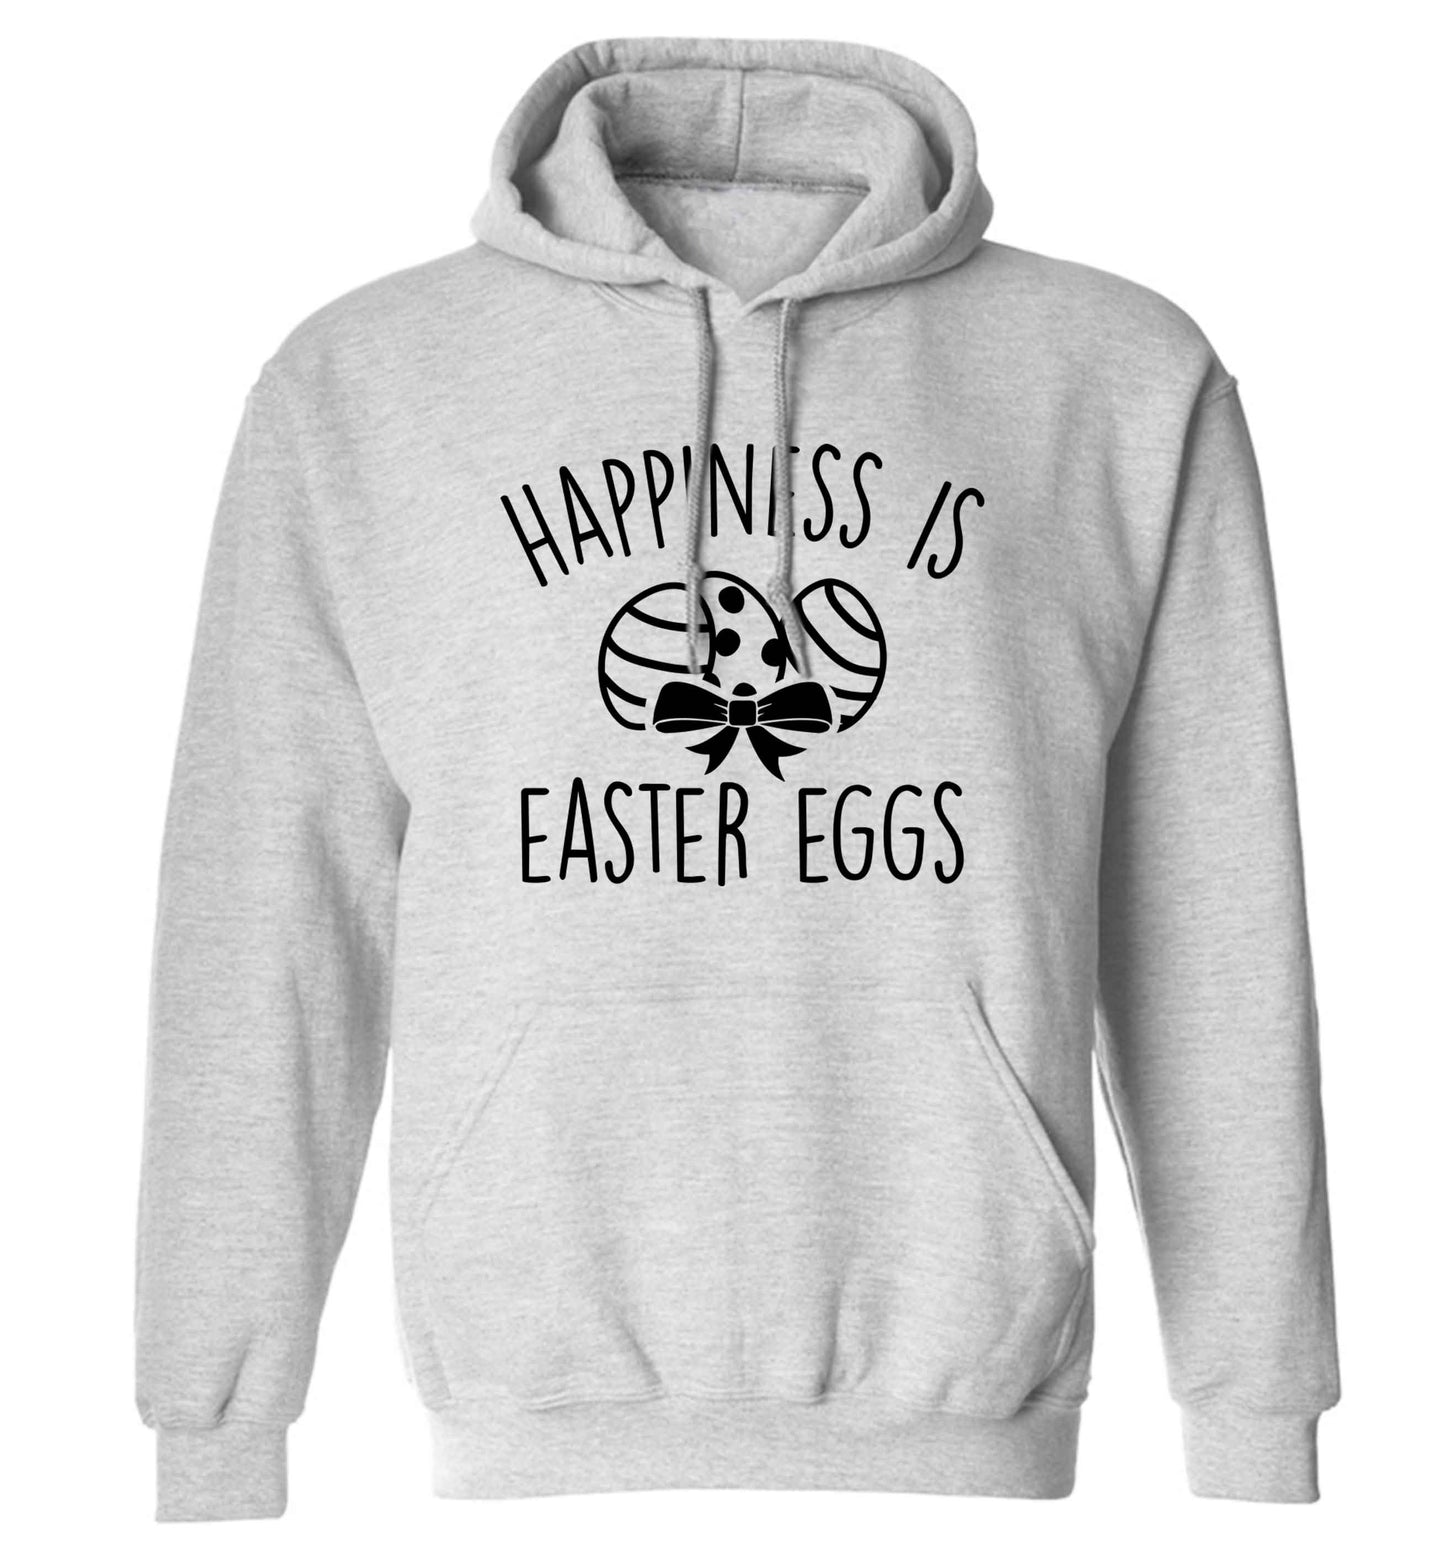 Happiness is Easter eggs adults unisex grey hoodie 2XL